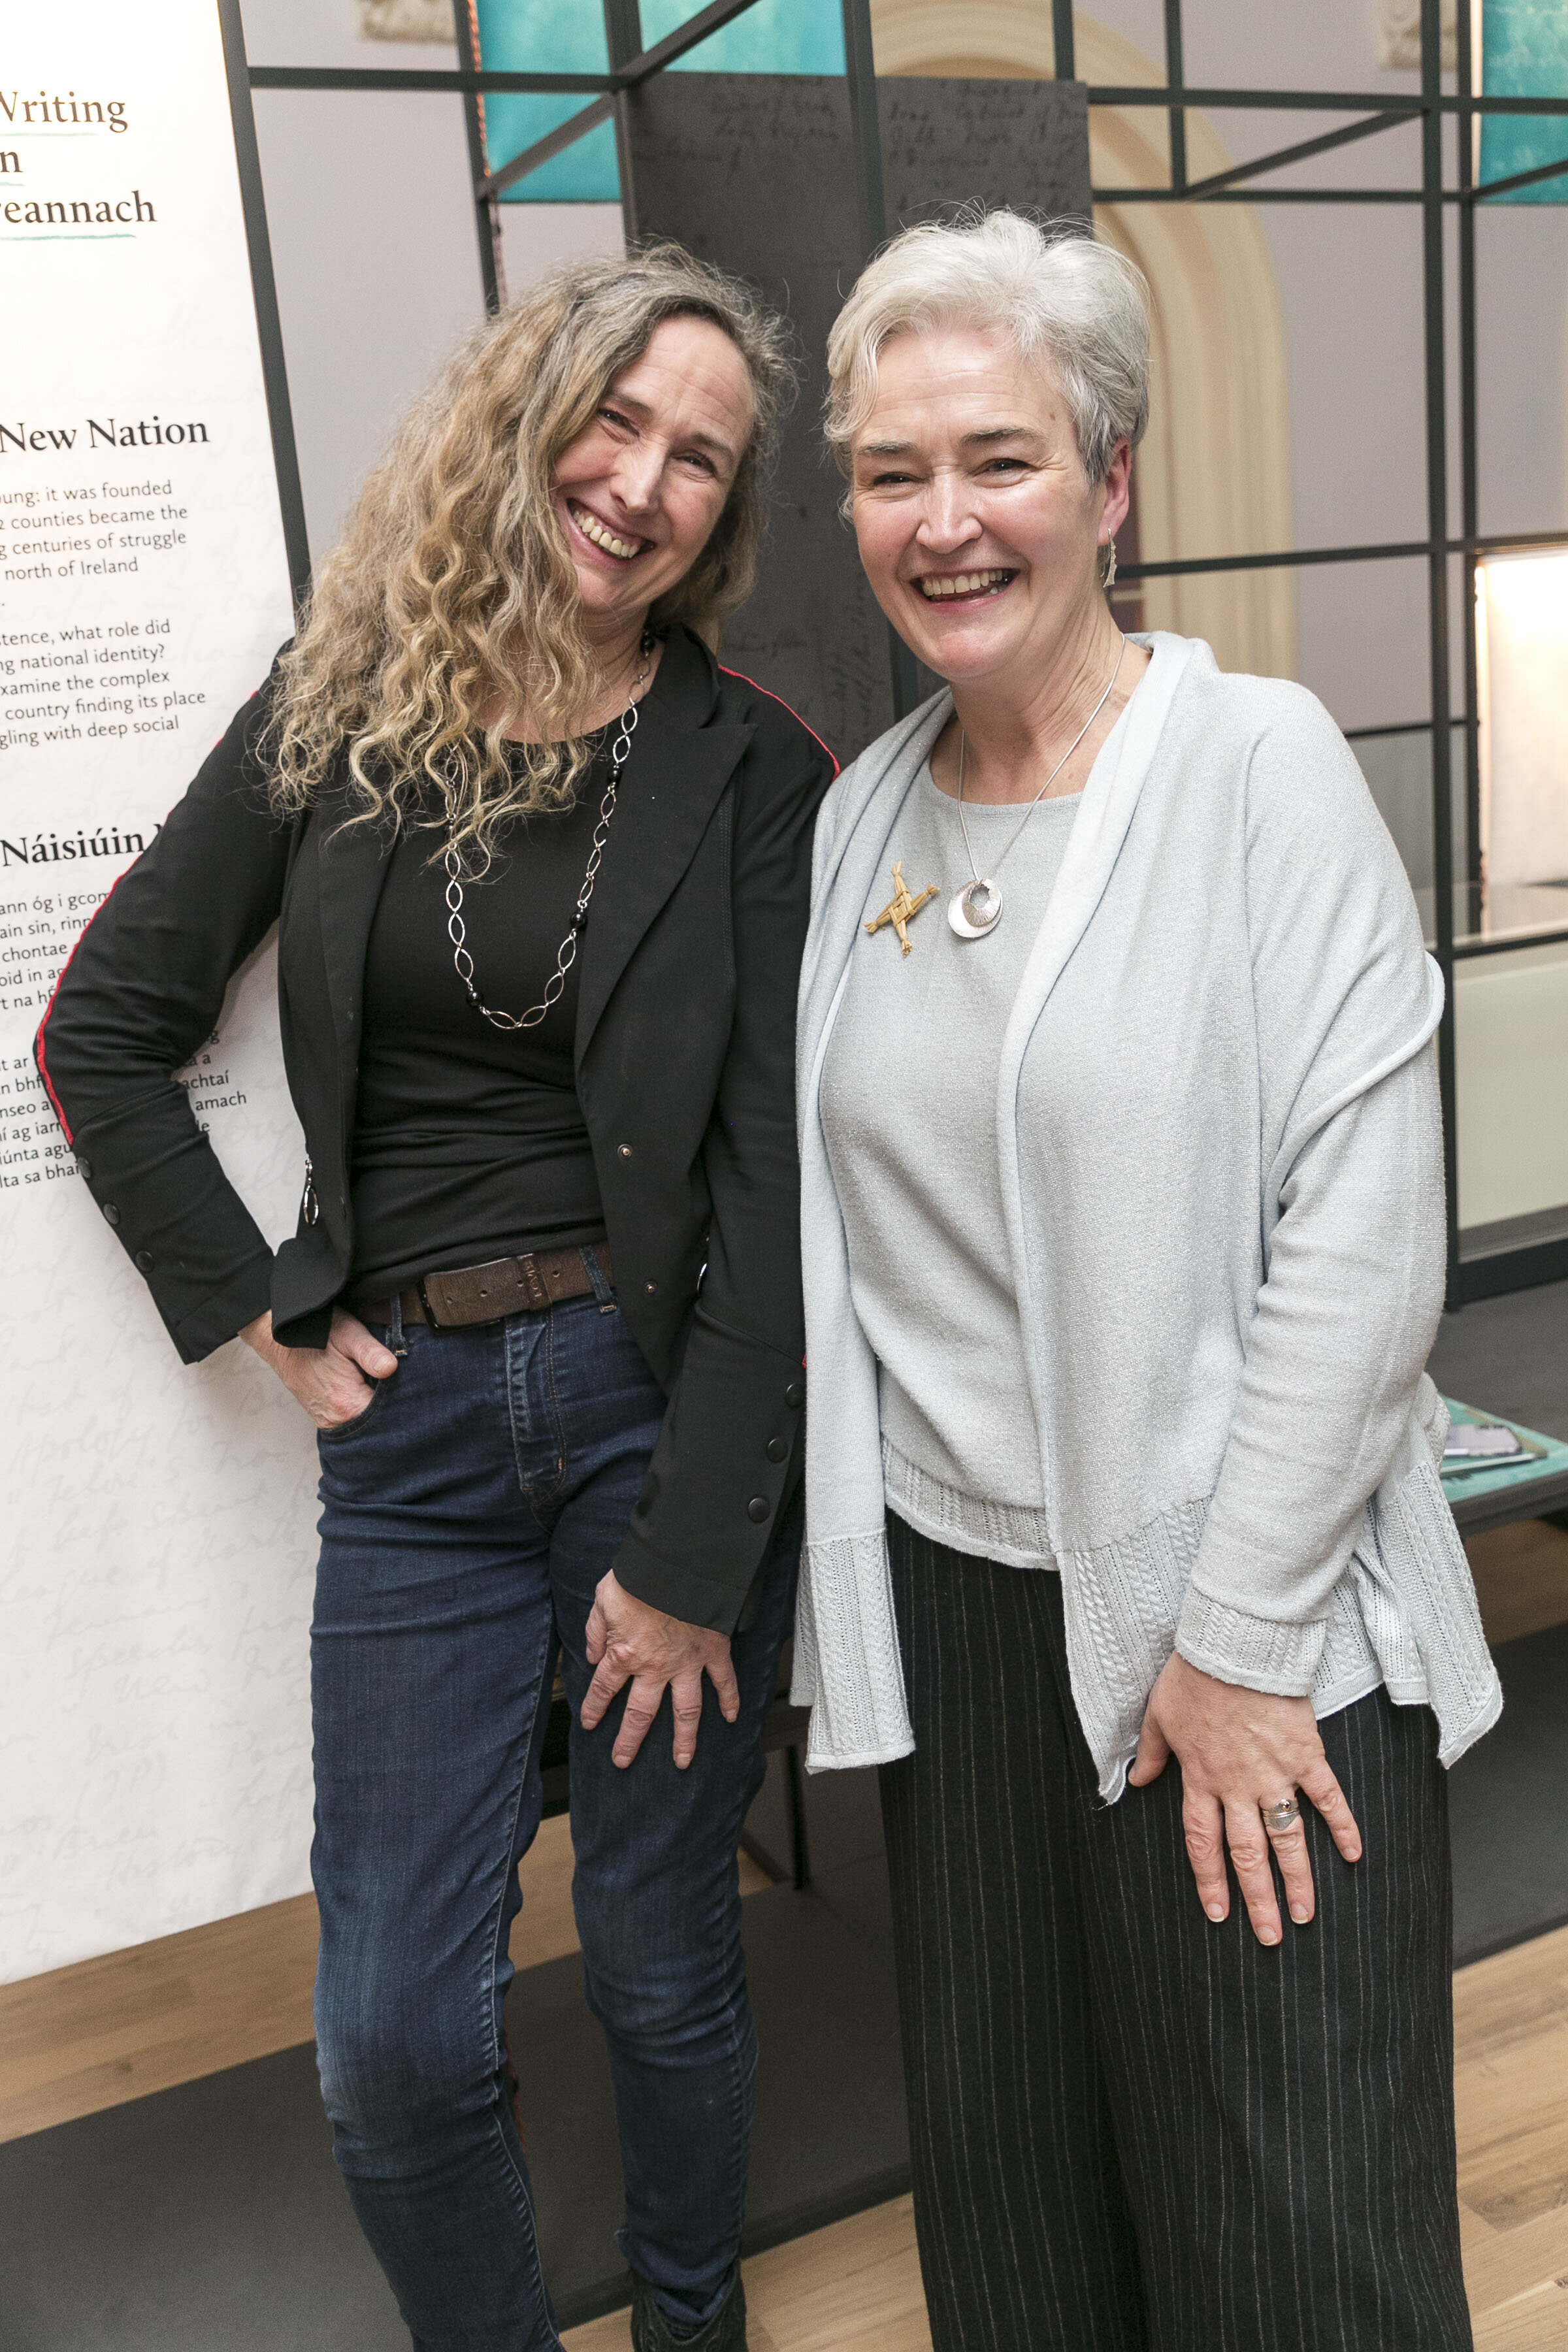  Una Sealy Artist with Martina Hamilton from Hamilton Gallery   Hamilton Gallery / MoLi / DFAT - exhibition opening by Sabina Higgins of "Eva Gore-Booth 93 Irish women artists respond to her life and work", part of Brigids Day Lá Fhéile Bríde, Celebr